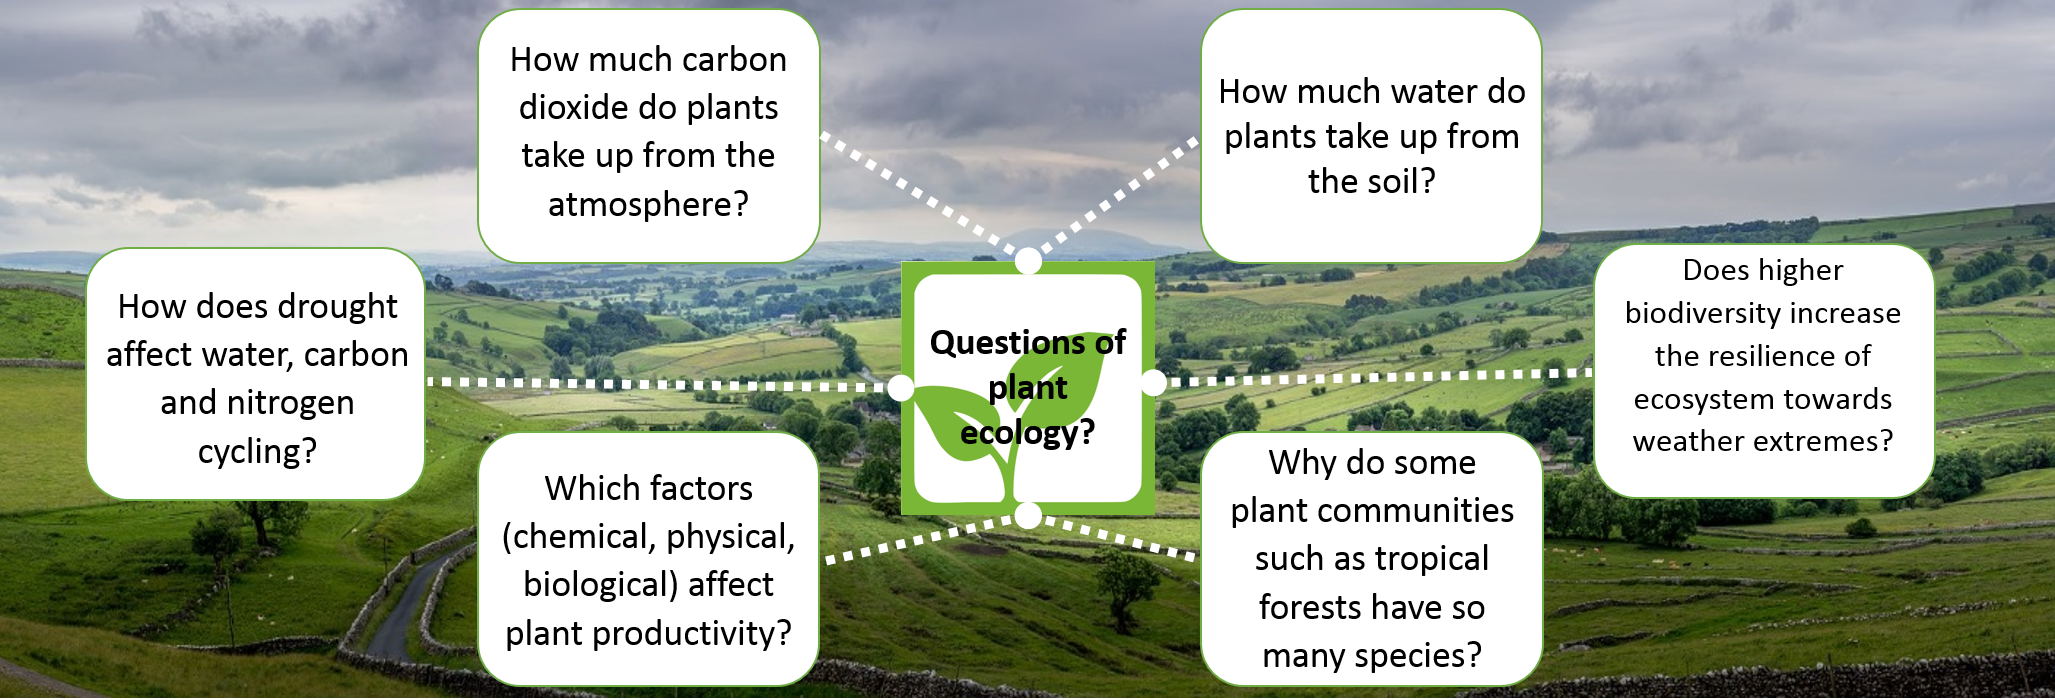 questions of plant ecology